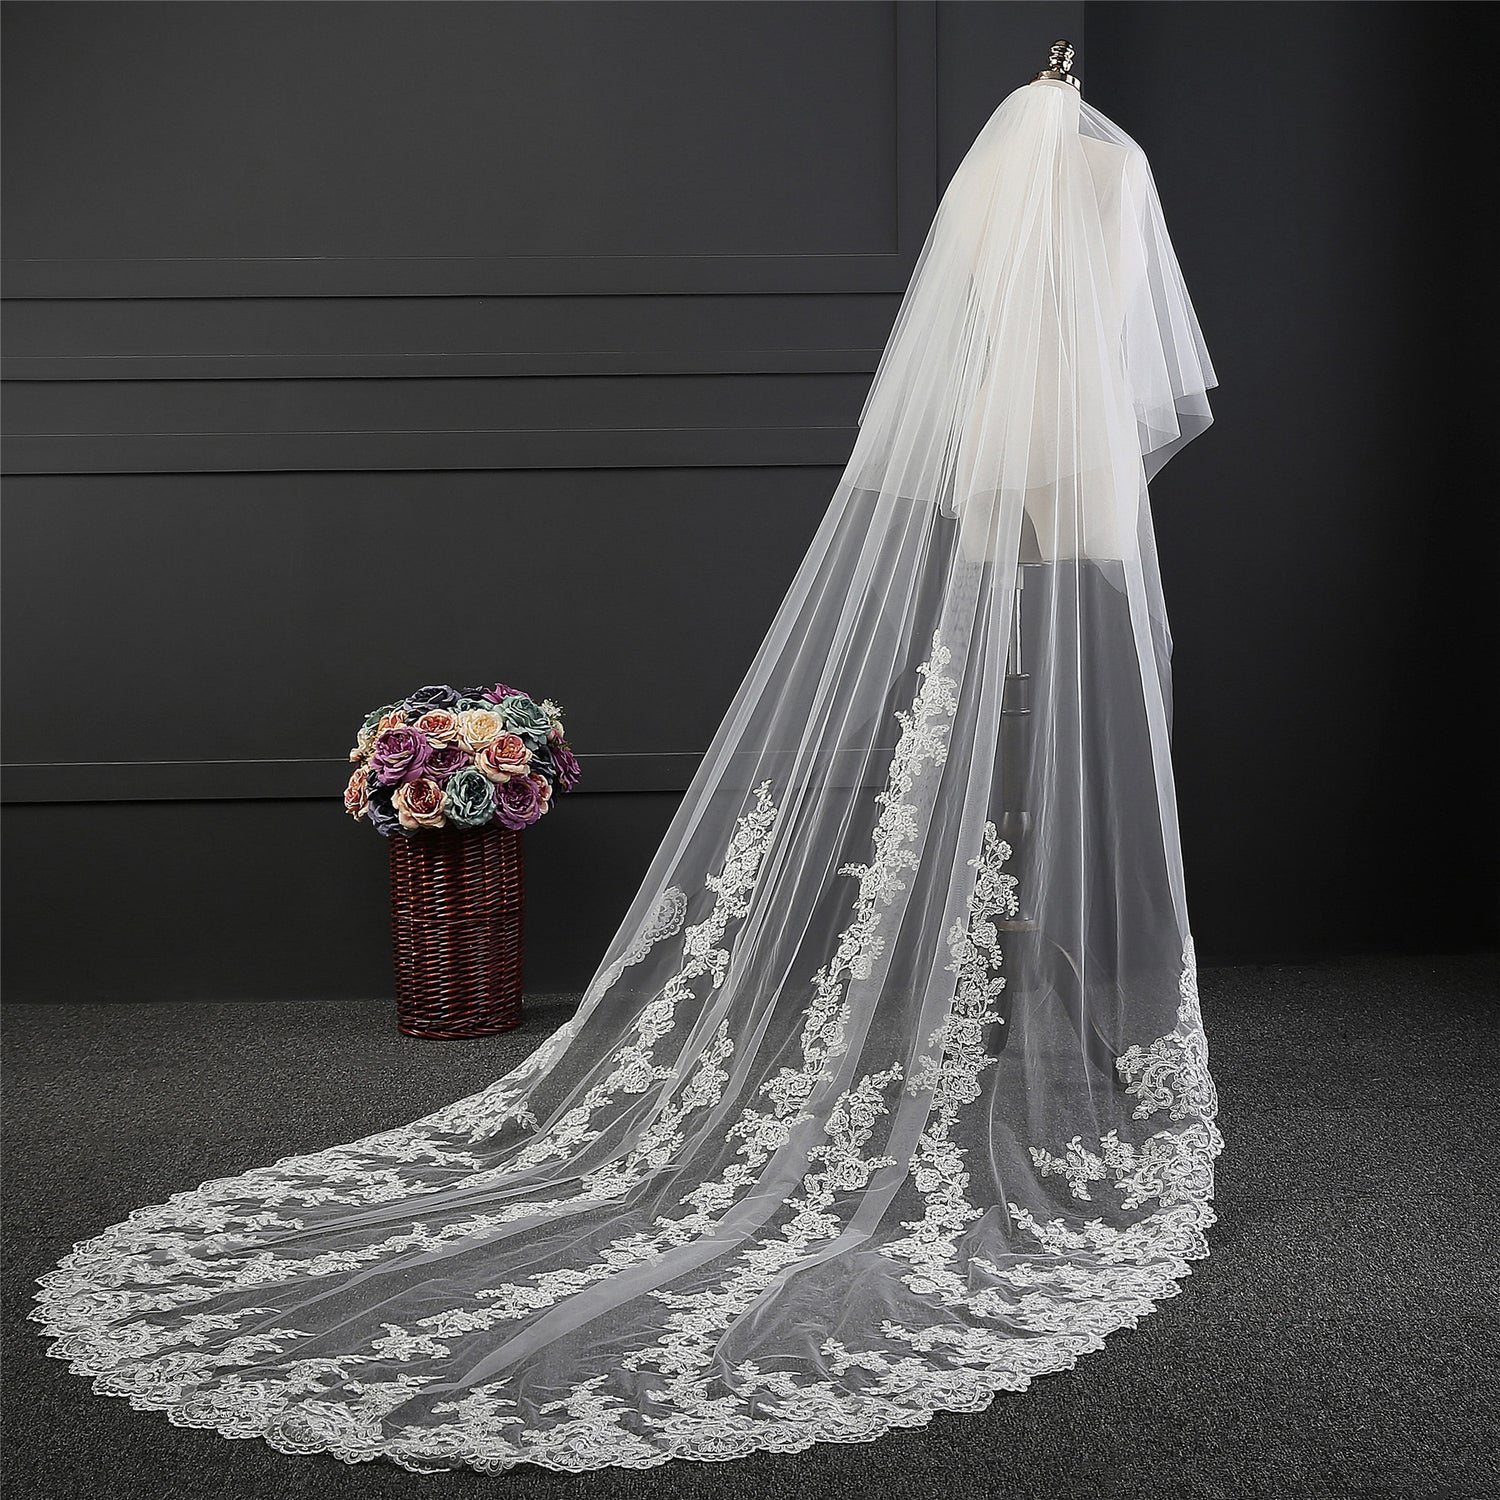 Lace wedding Veil FN-060, 118 inches bridal veil, Tulle Cathedral length,  Veil with comb, One tier veil, Bundle veil